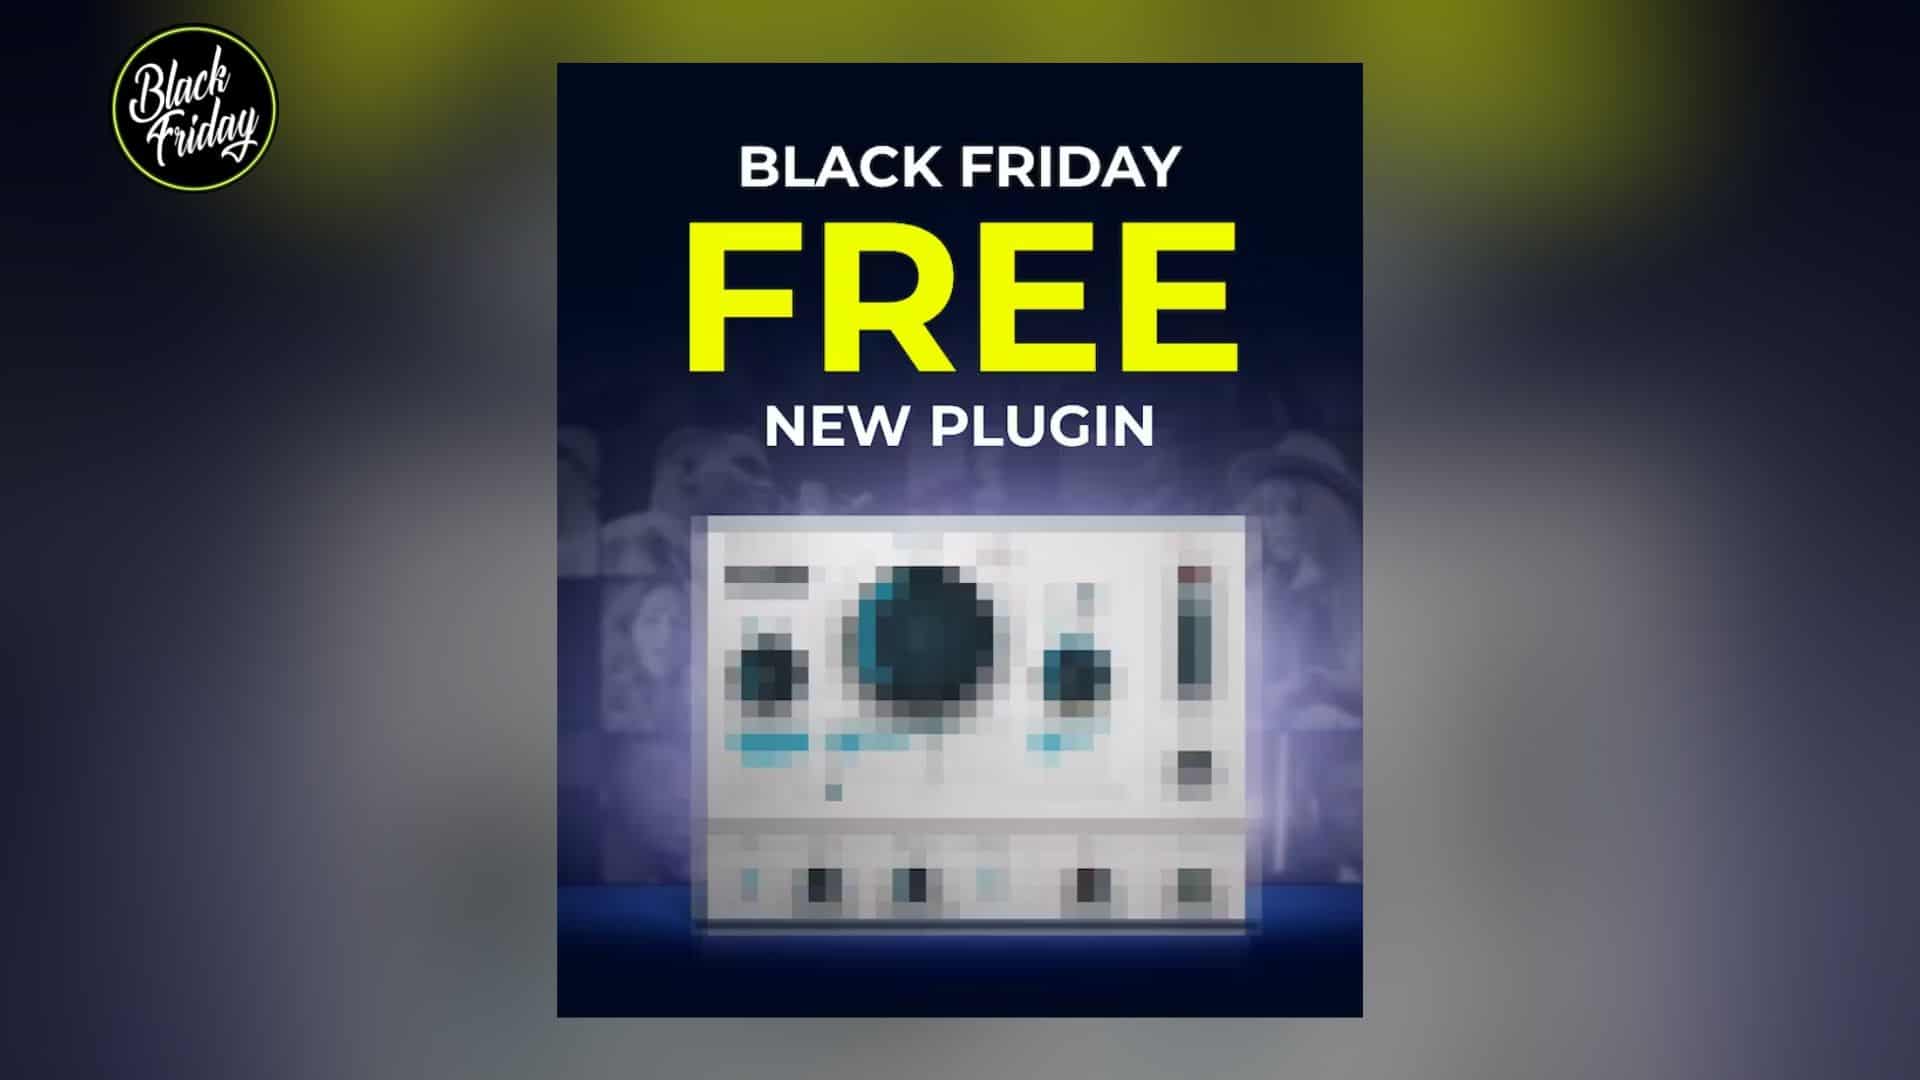 Waves Black Friday Gift – New Plugin being given away FREE while supplies last